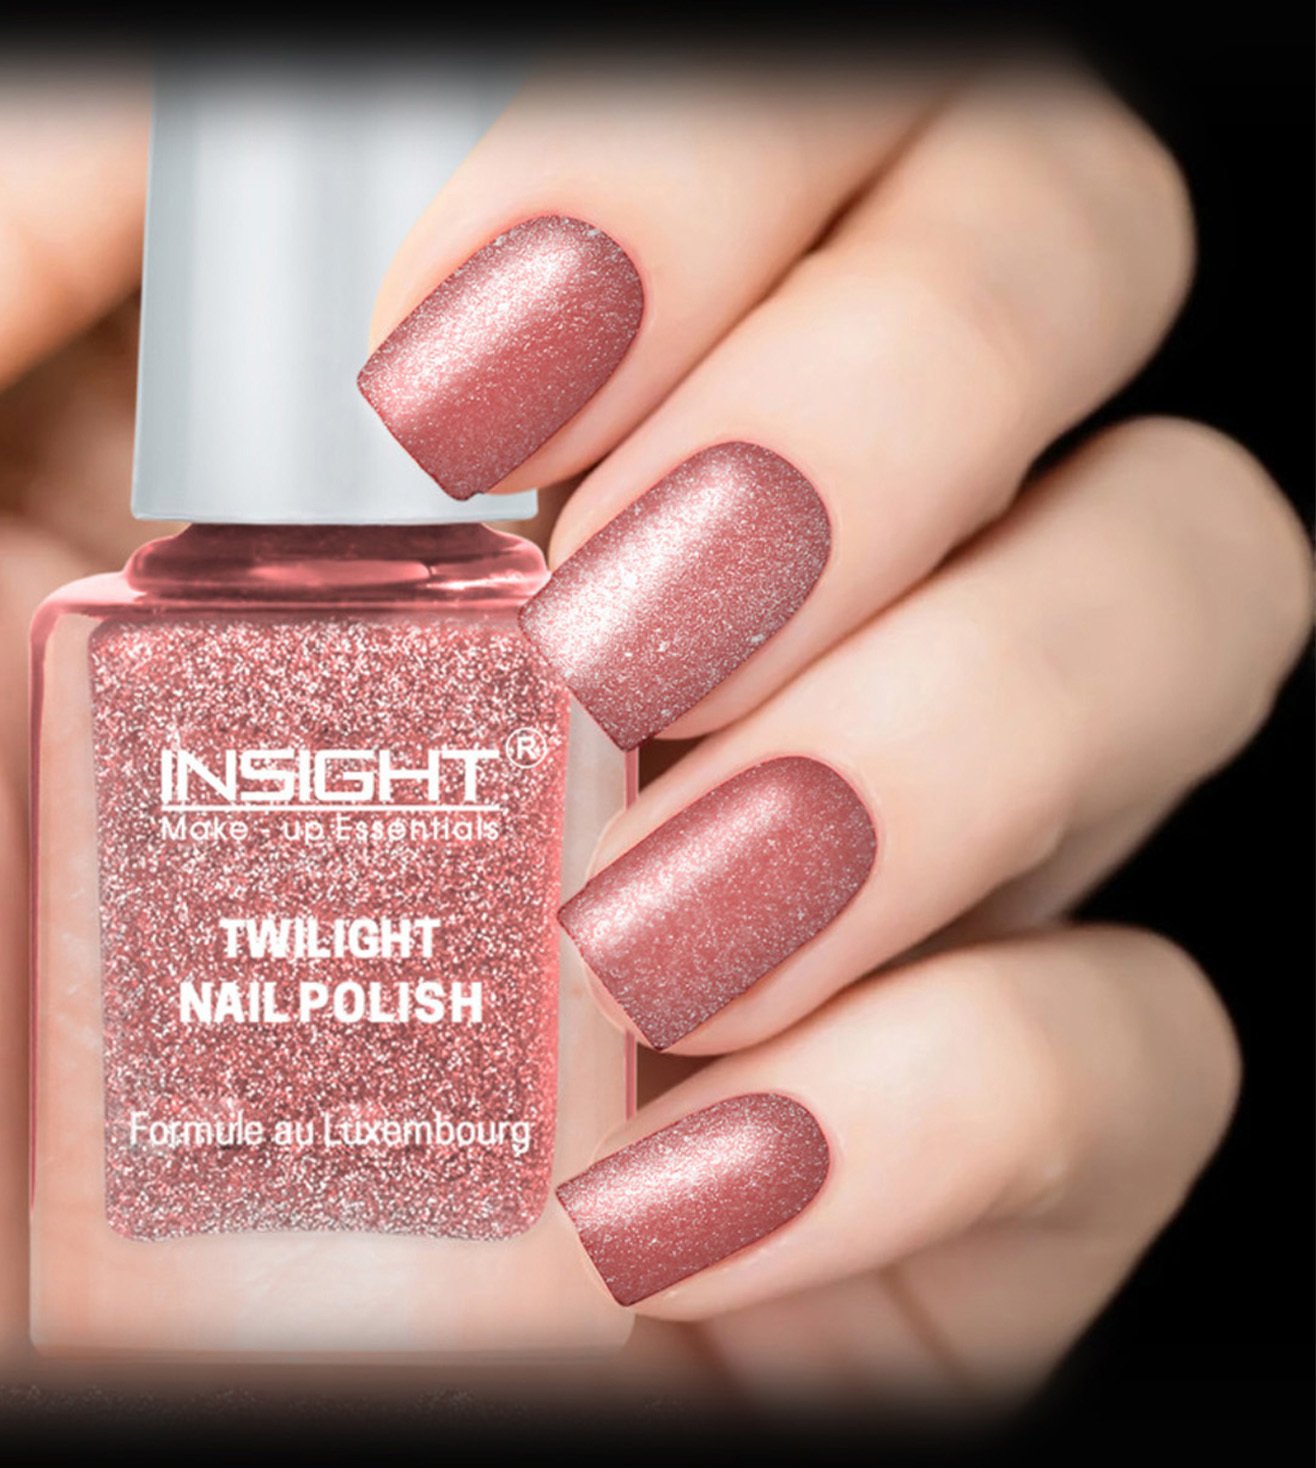 INSIGHT 5 Toxic Free Long Lasting Nail Polish, dh-127=336 : Buy Online at  Best Price in KSA - Souq is now Amazon.sa: Beauty